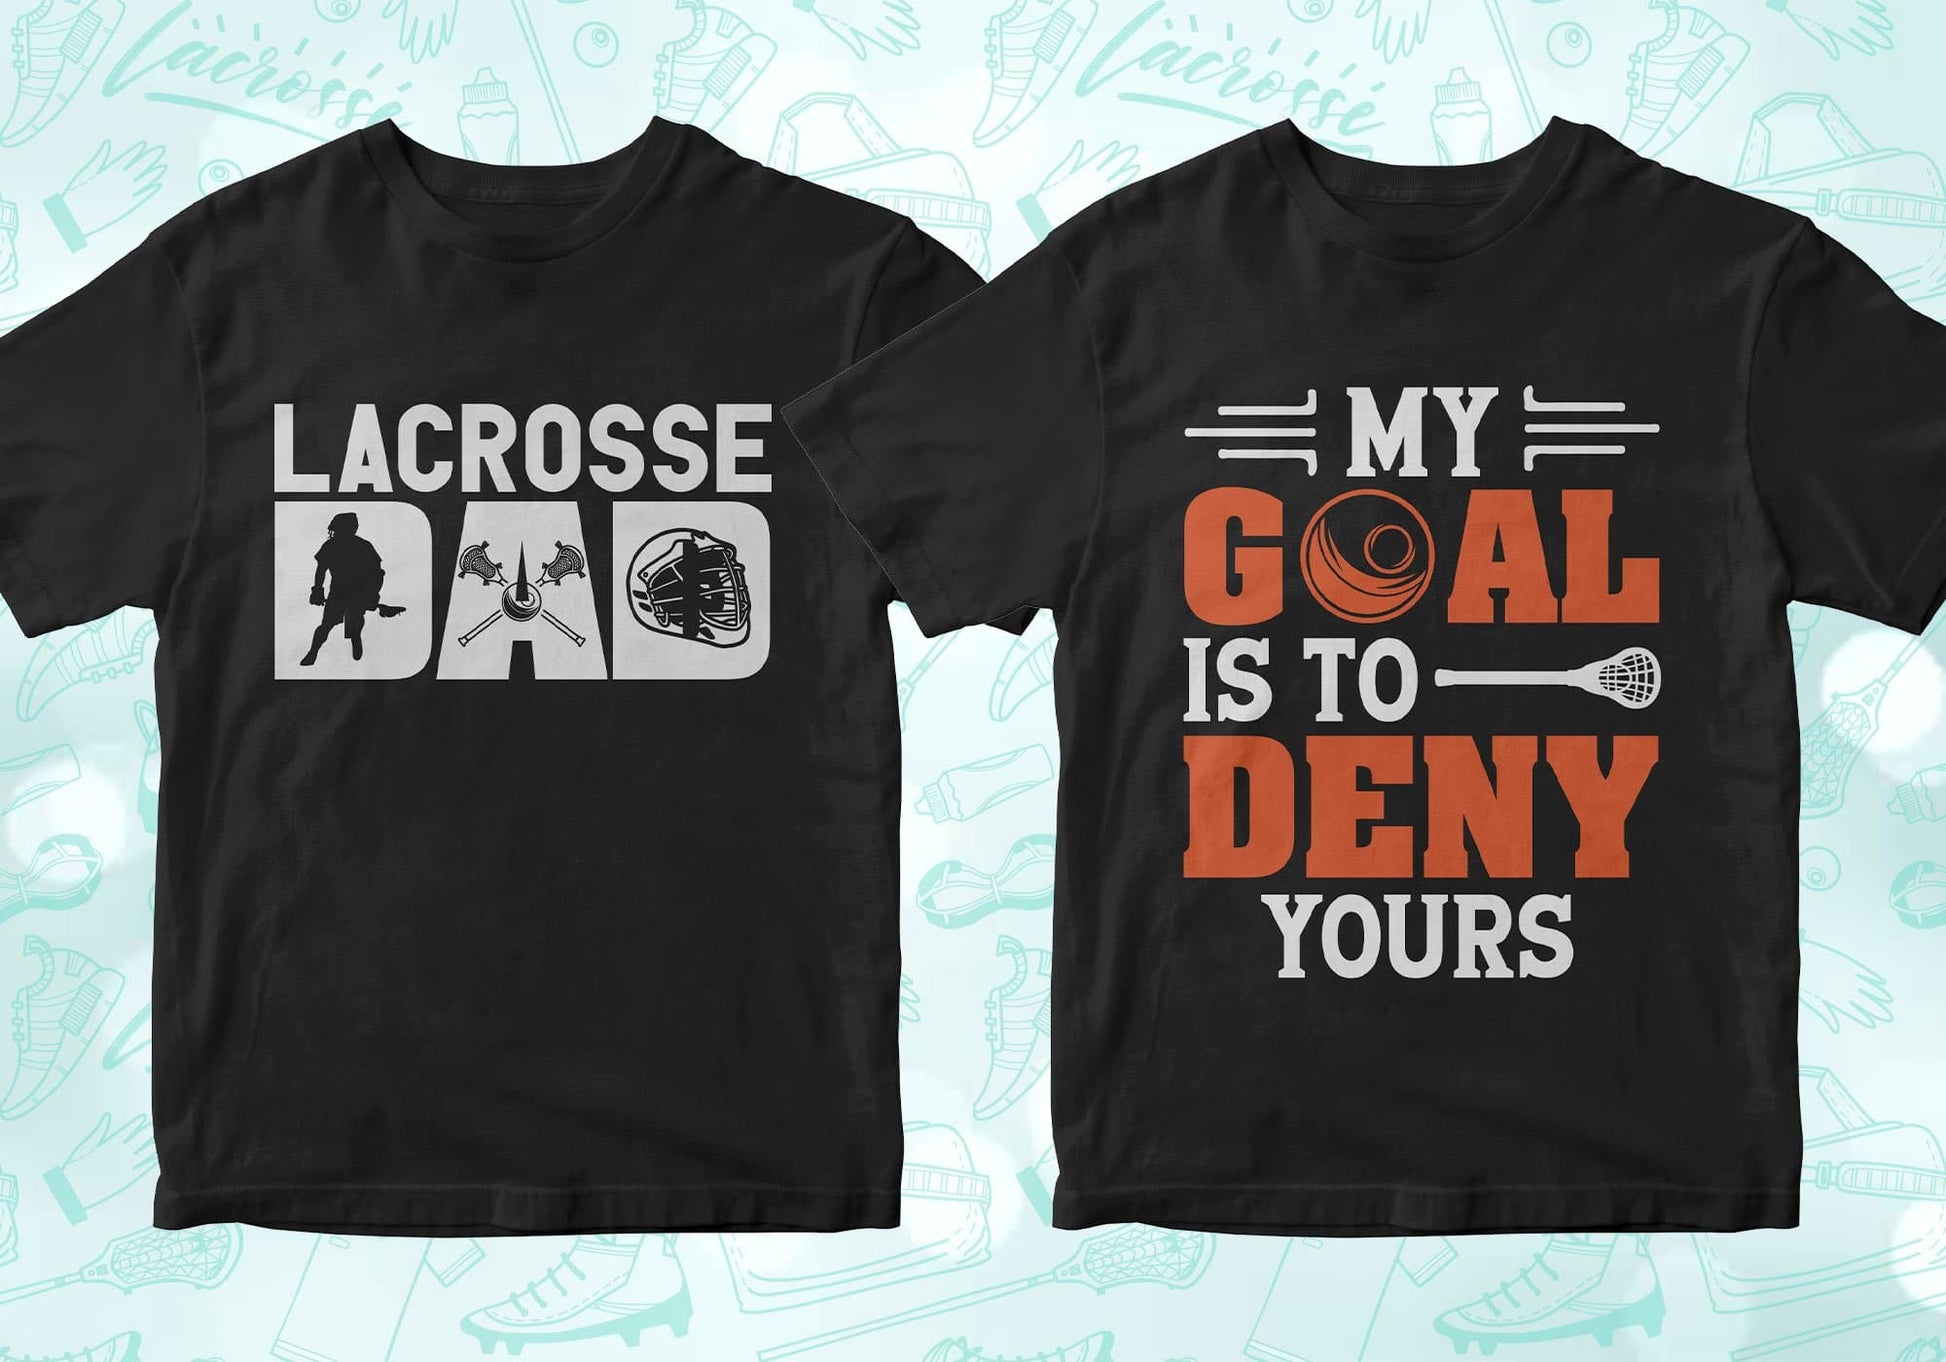 lacrosse dad, my goal is to deny yours, lacrosse shirts lacrosse tshirt lacrosse t shirts lacrosse shirt designs lacrosse graphic